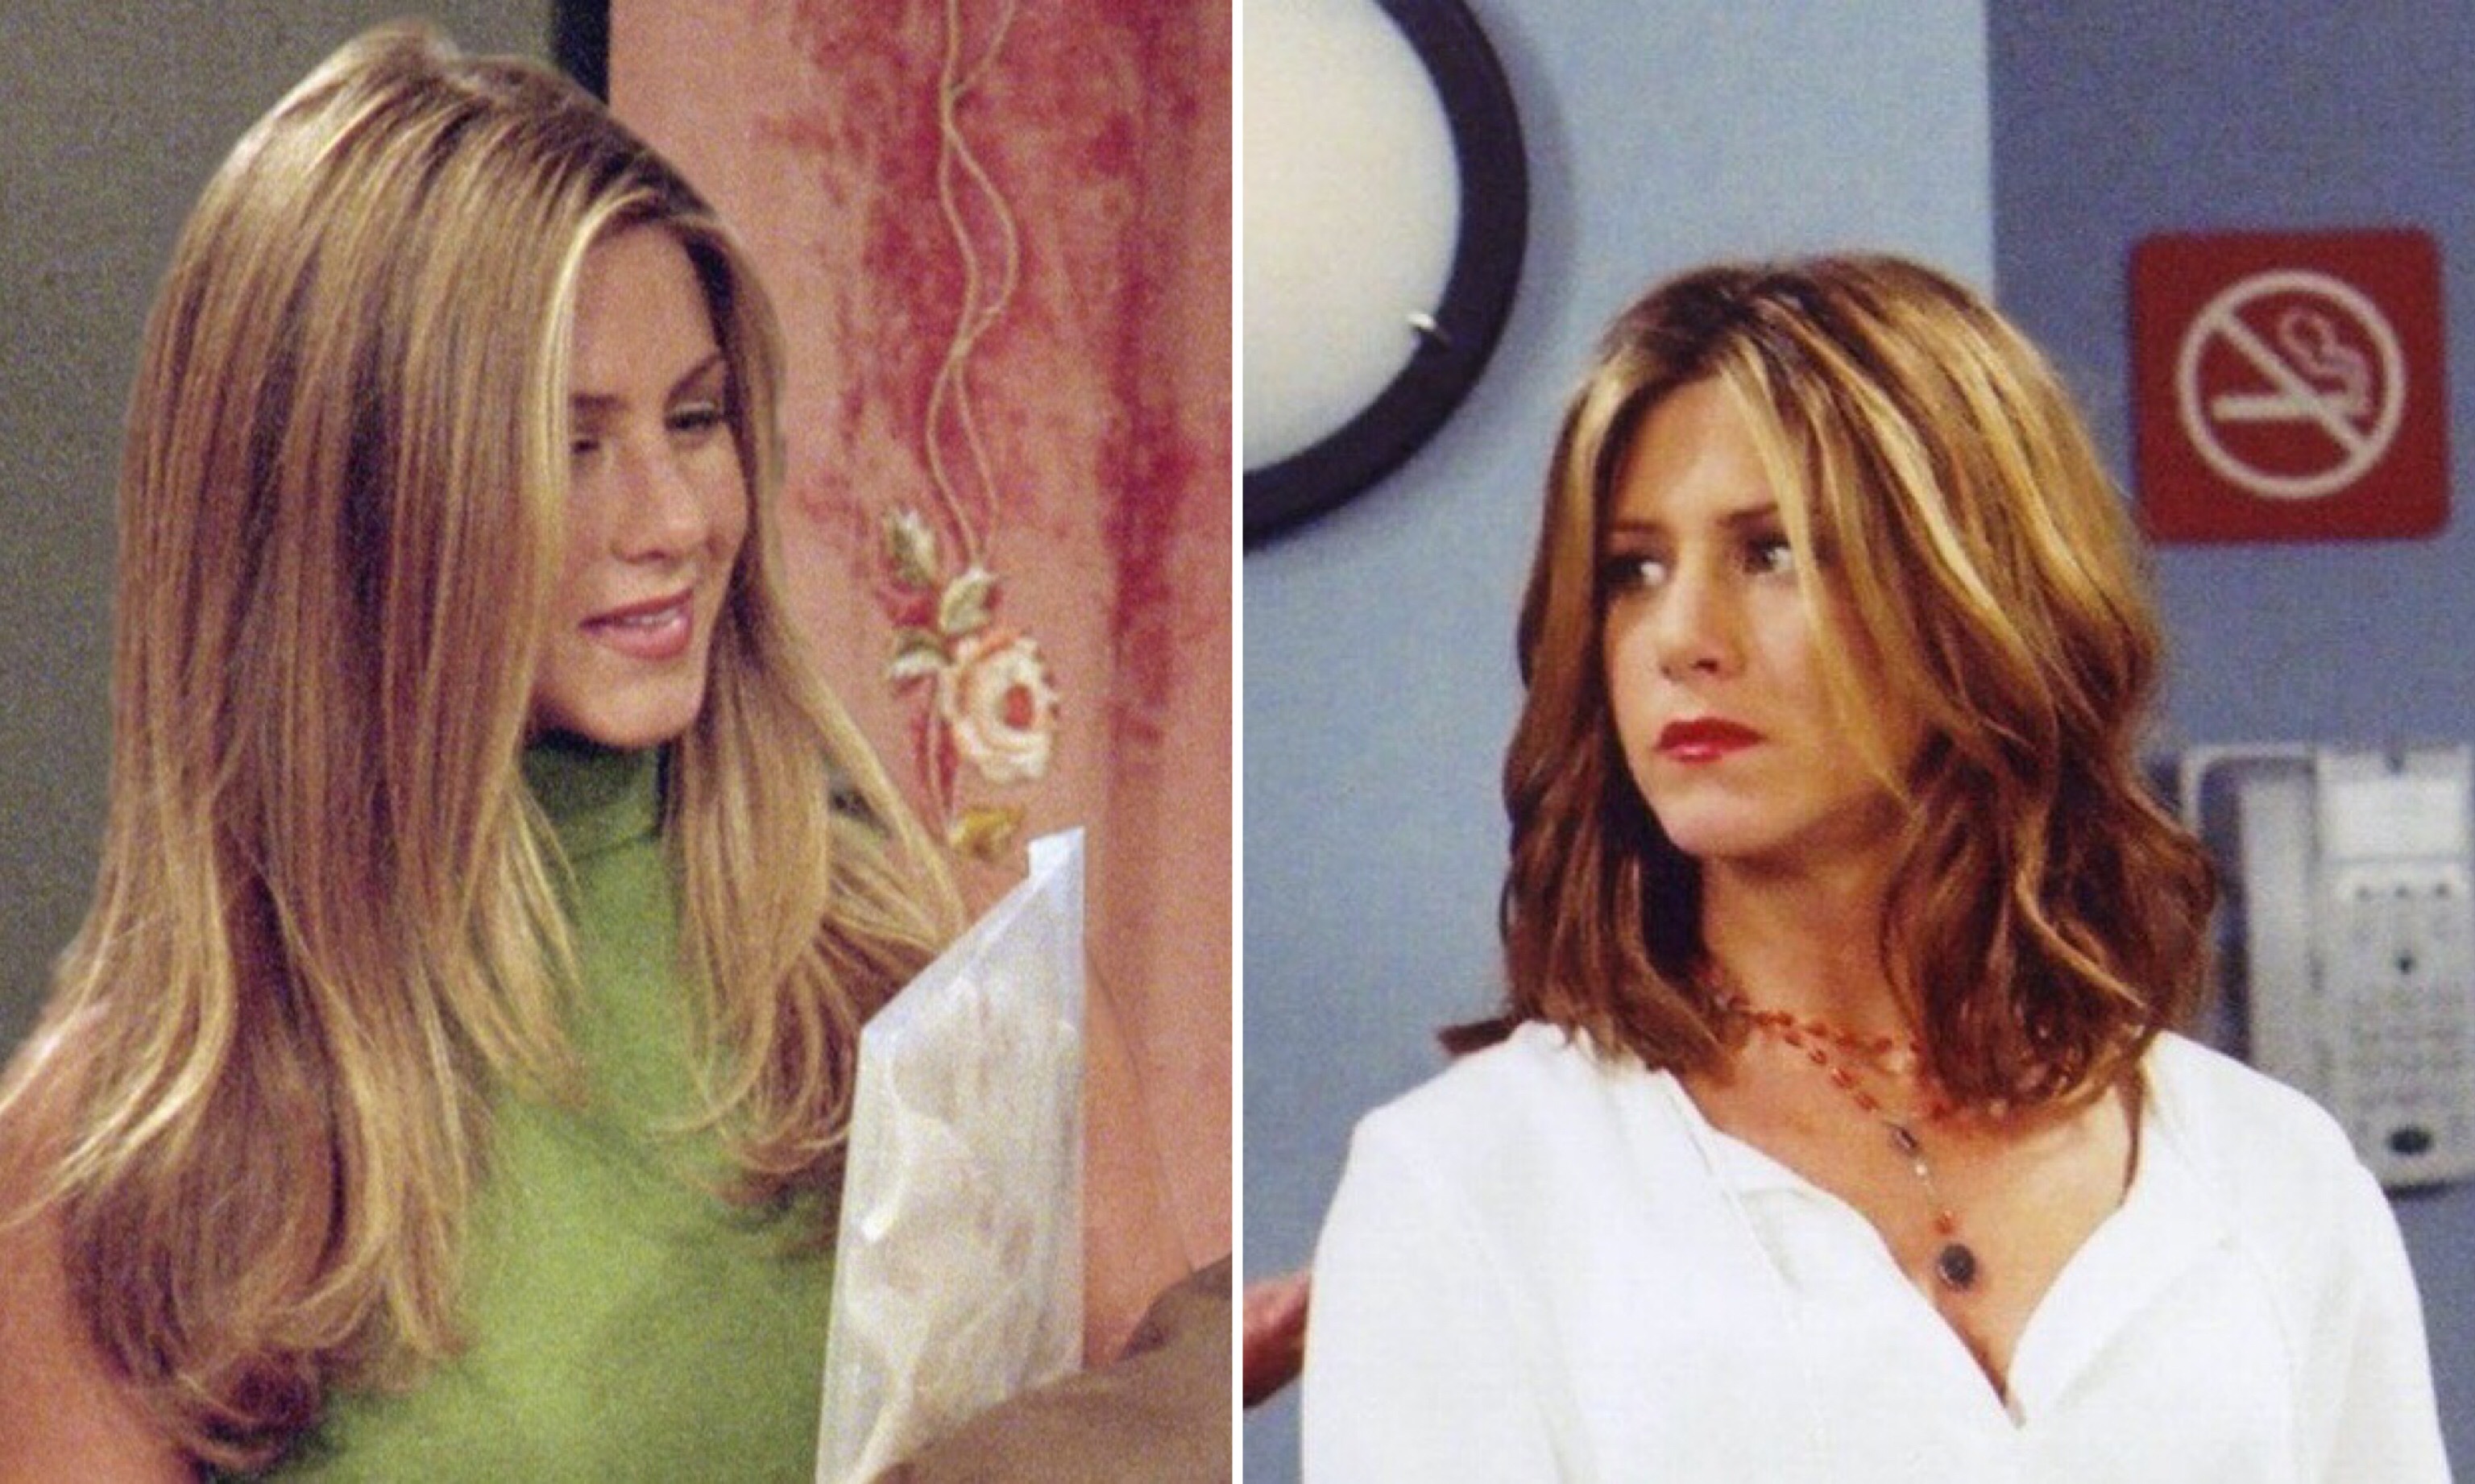 Any hair care pros know how I can get the season three Rachel Green hair  color lol : r/FancyFollicles